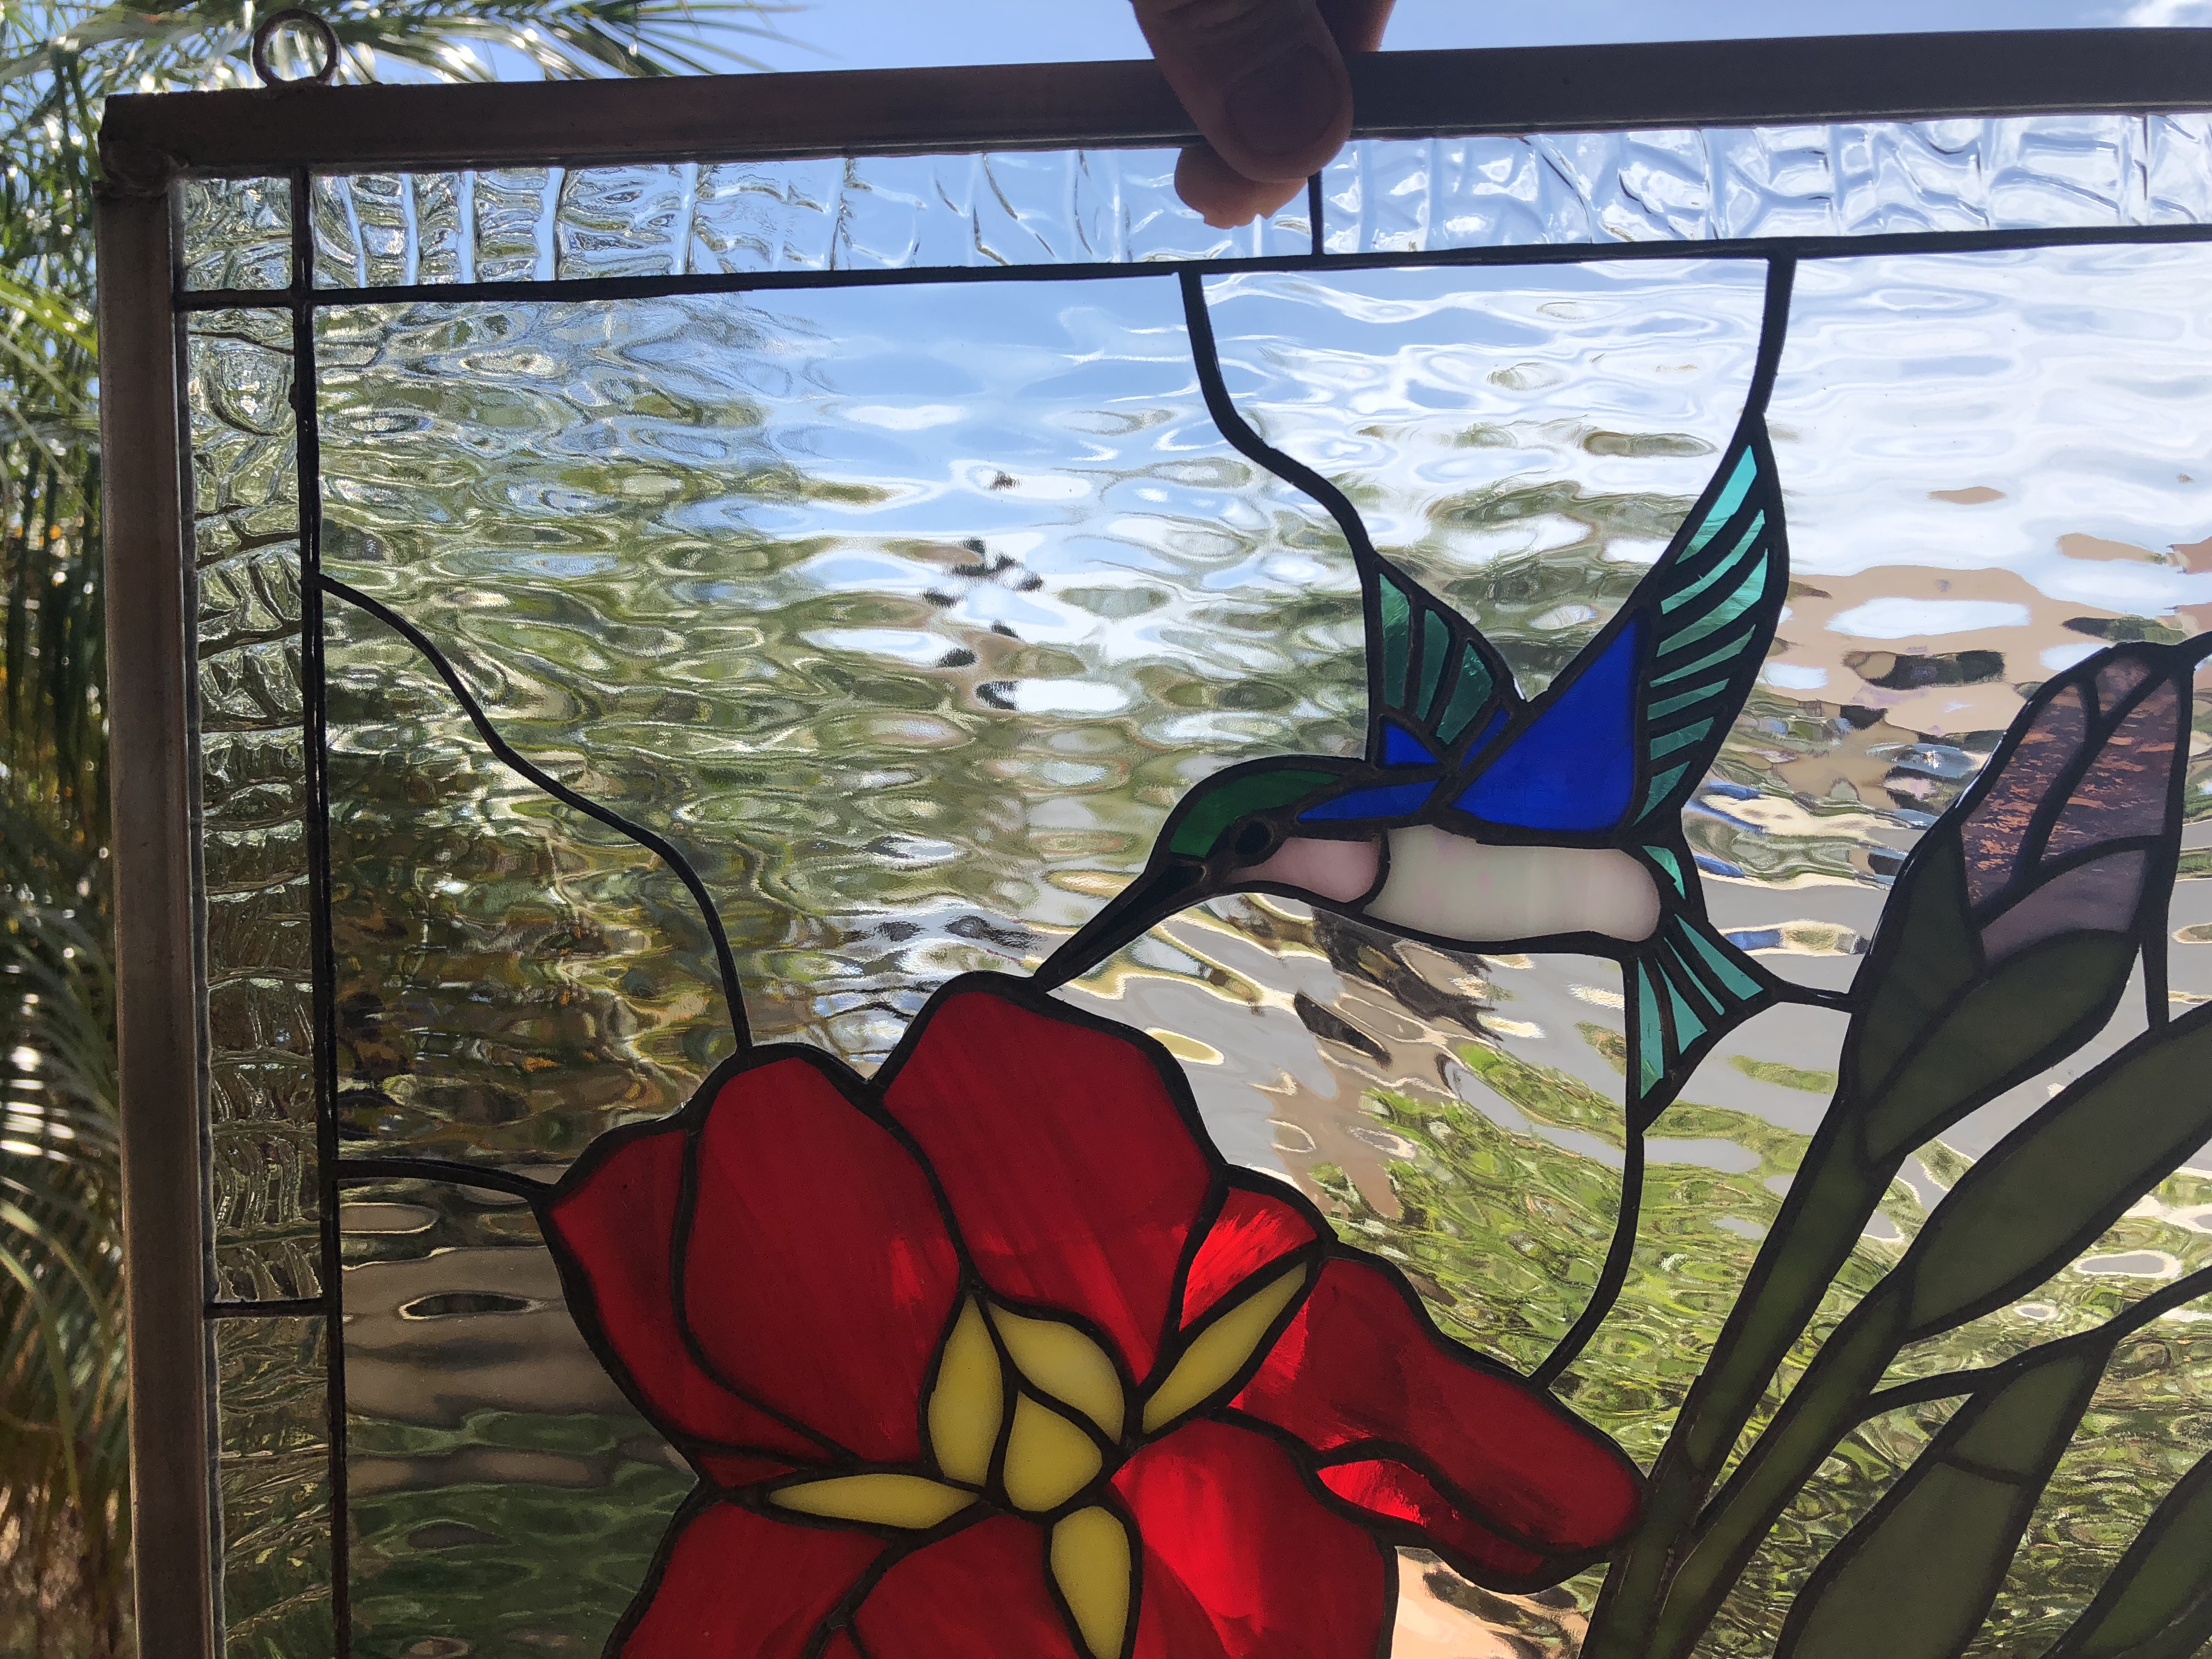 Hummingbirds Stained Glass Windows Panels And Hangings | My XXX Hot Girl